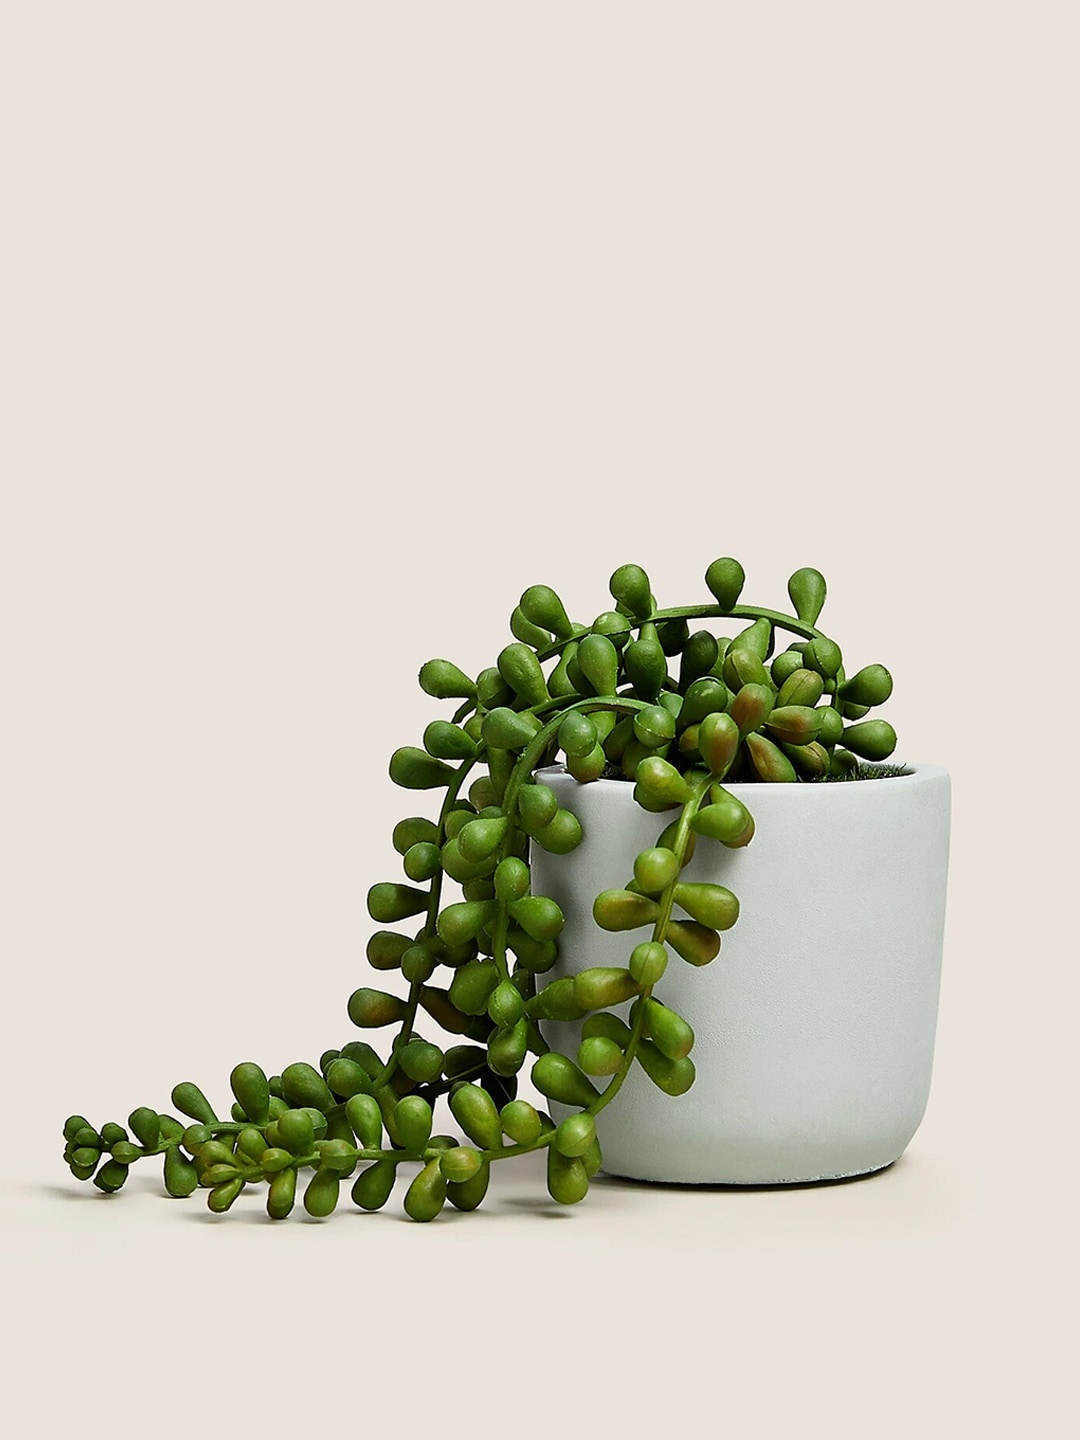 Marks & Spencer Green Artificial Plant With Pot Price in India